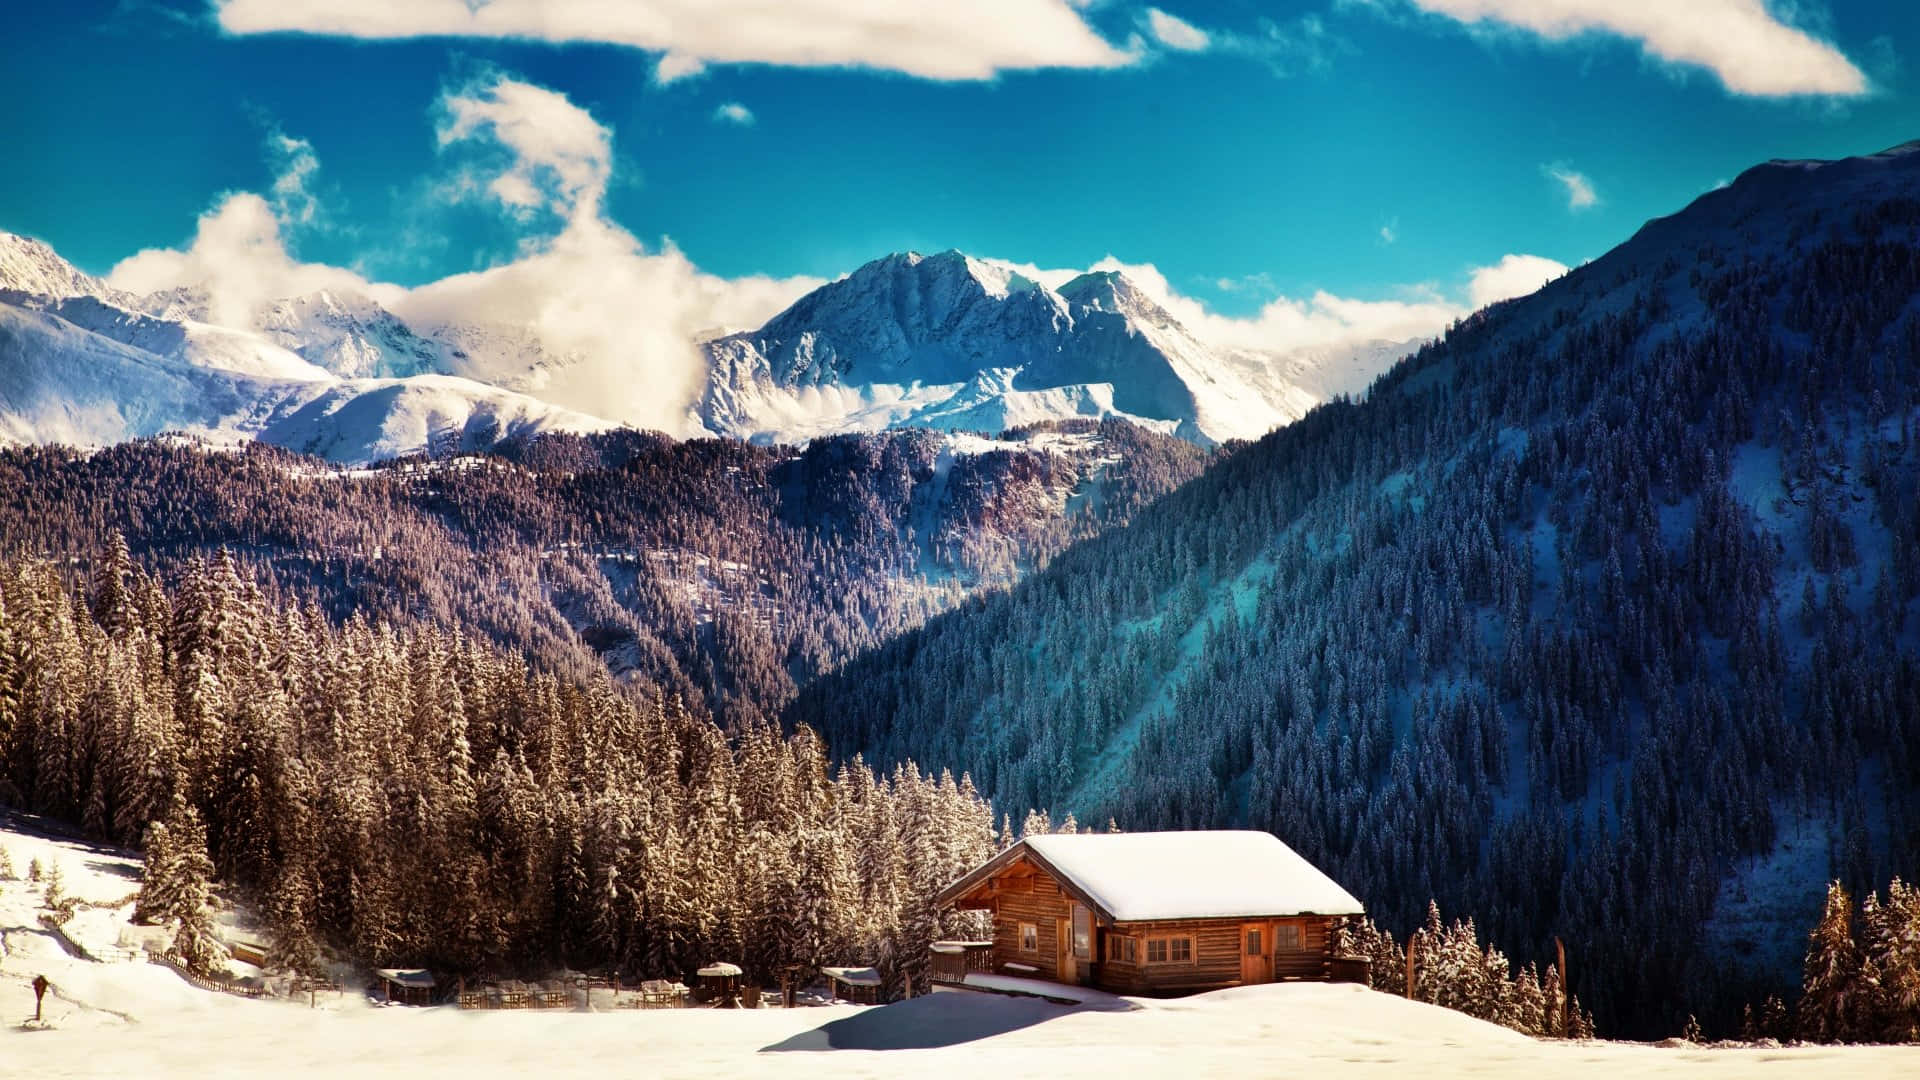 Snow Covered Cabin In The Mountain Background